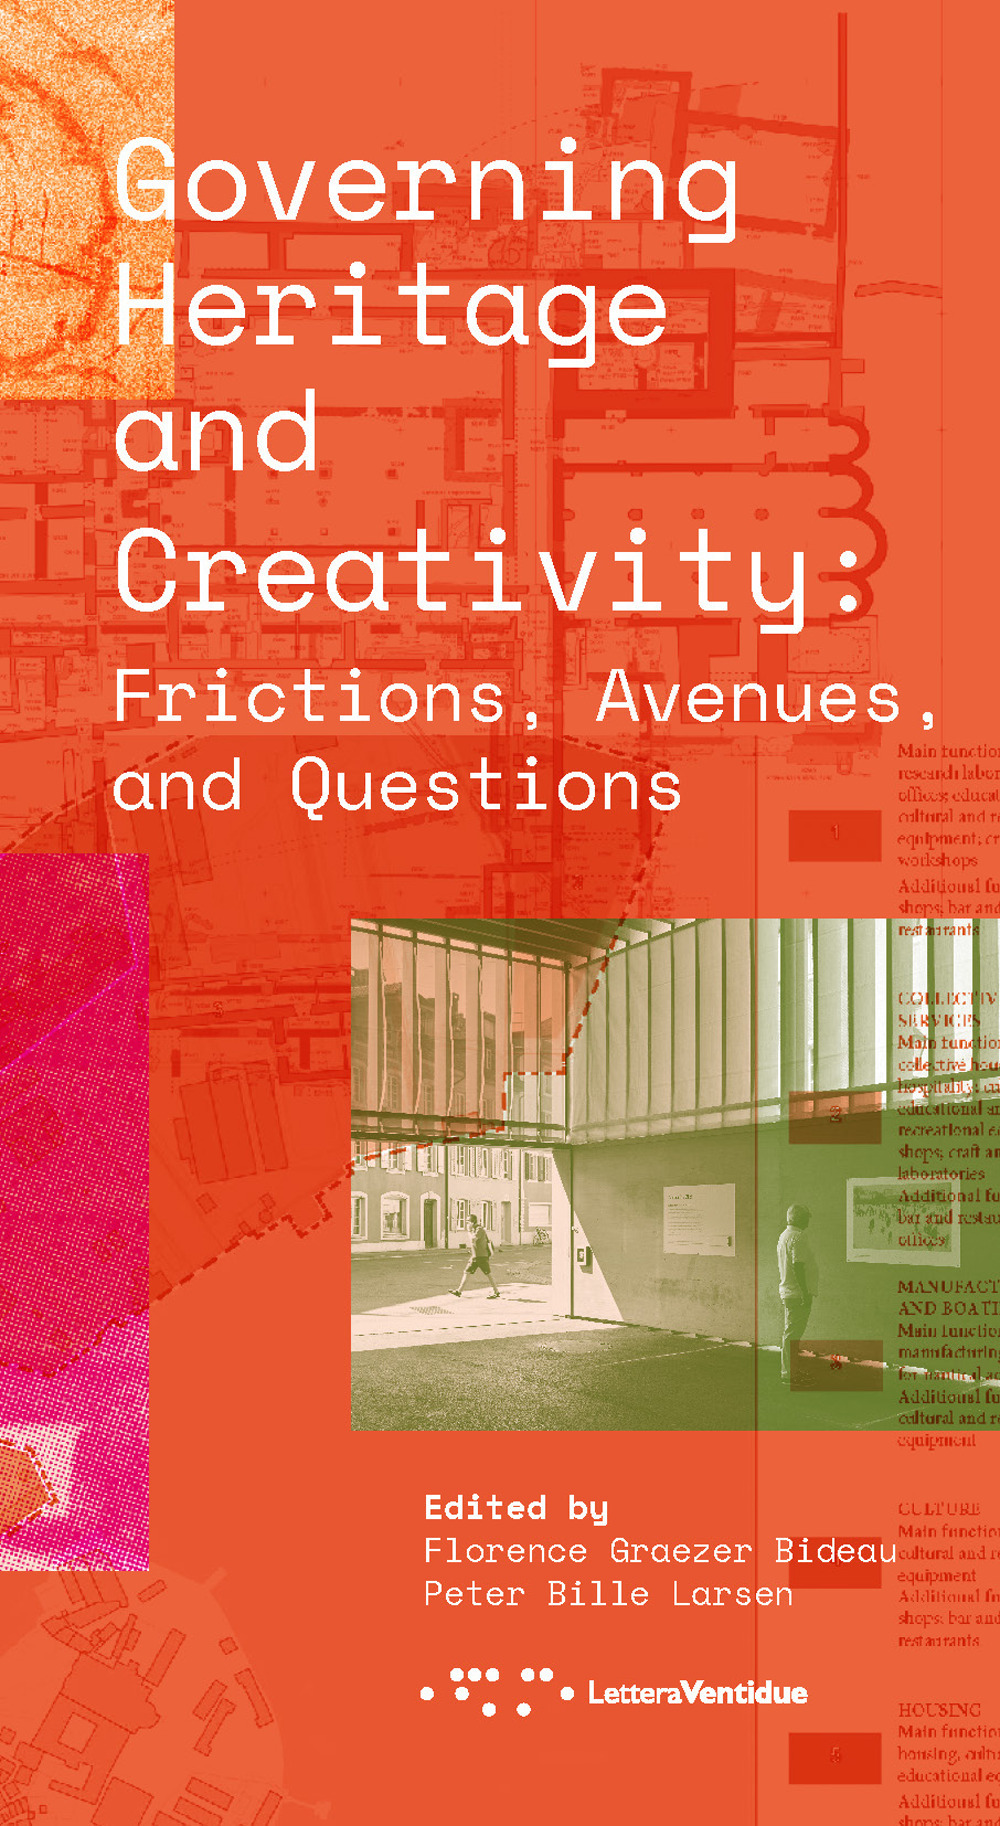 Governing heritage and creativity. Frictions, avenues and questions